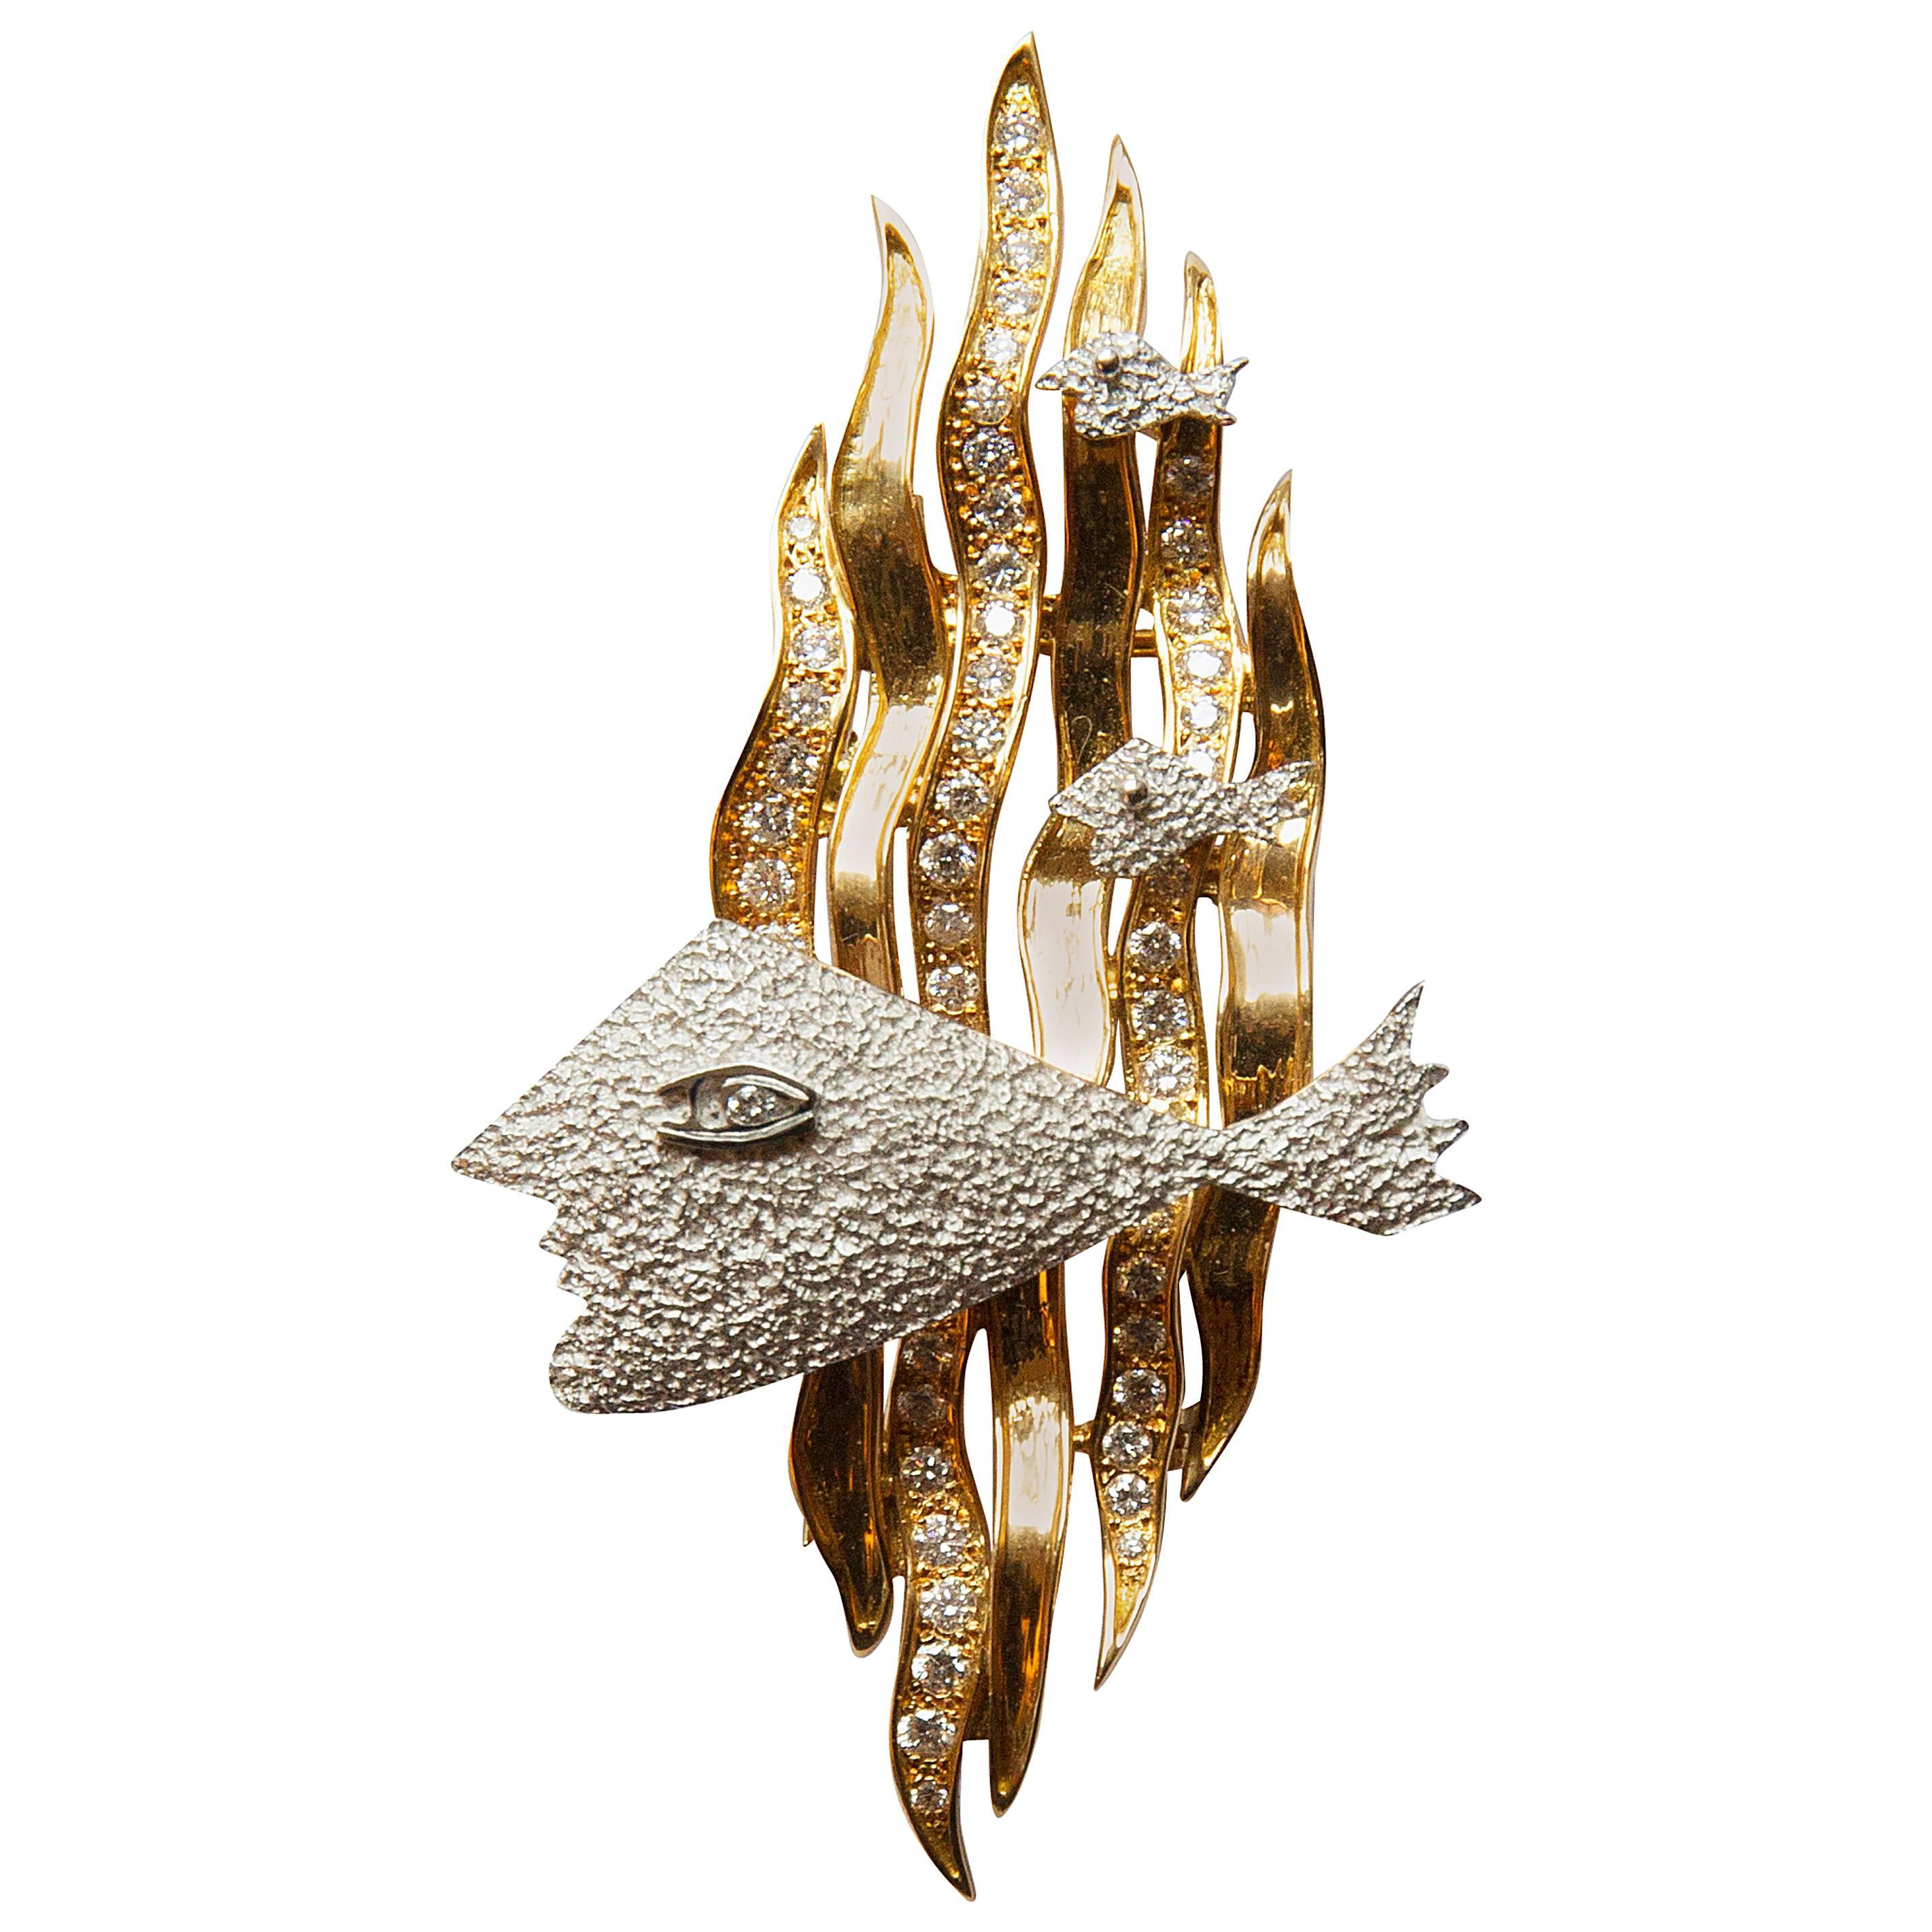 1963 Georges Braque Yellow and White Gold and Cut Diamonds Brooch "HEBE"